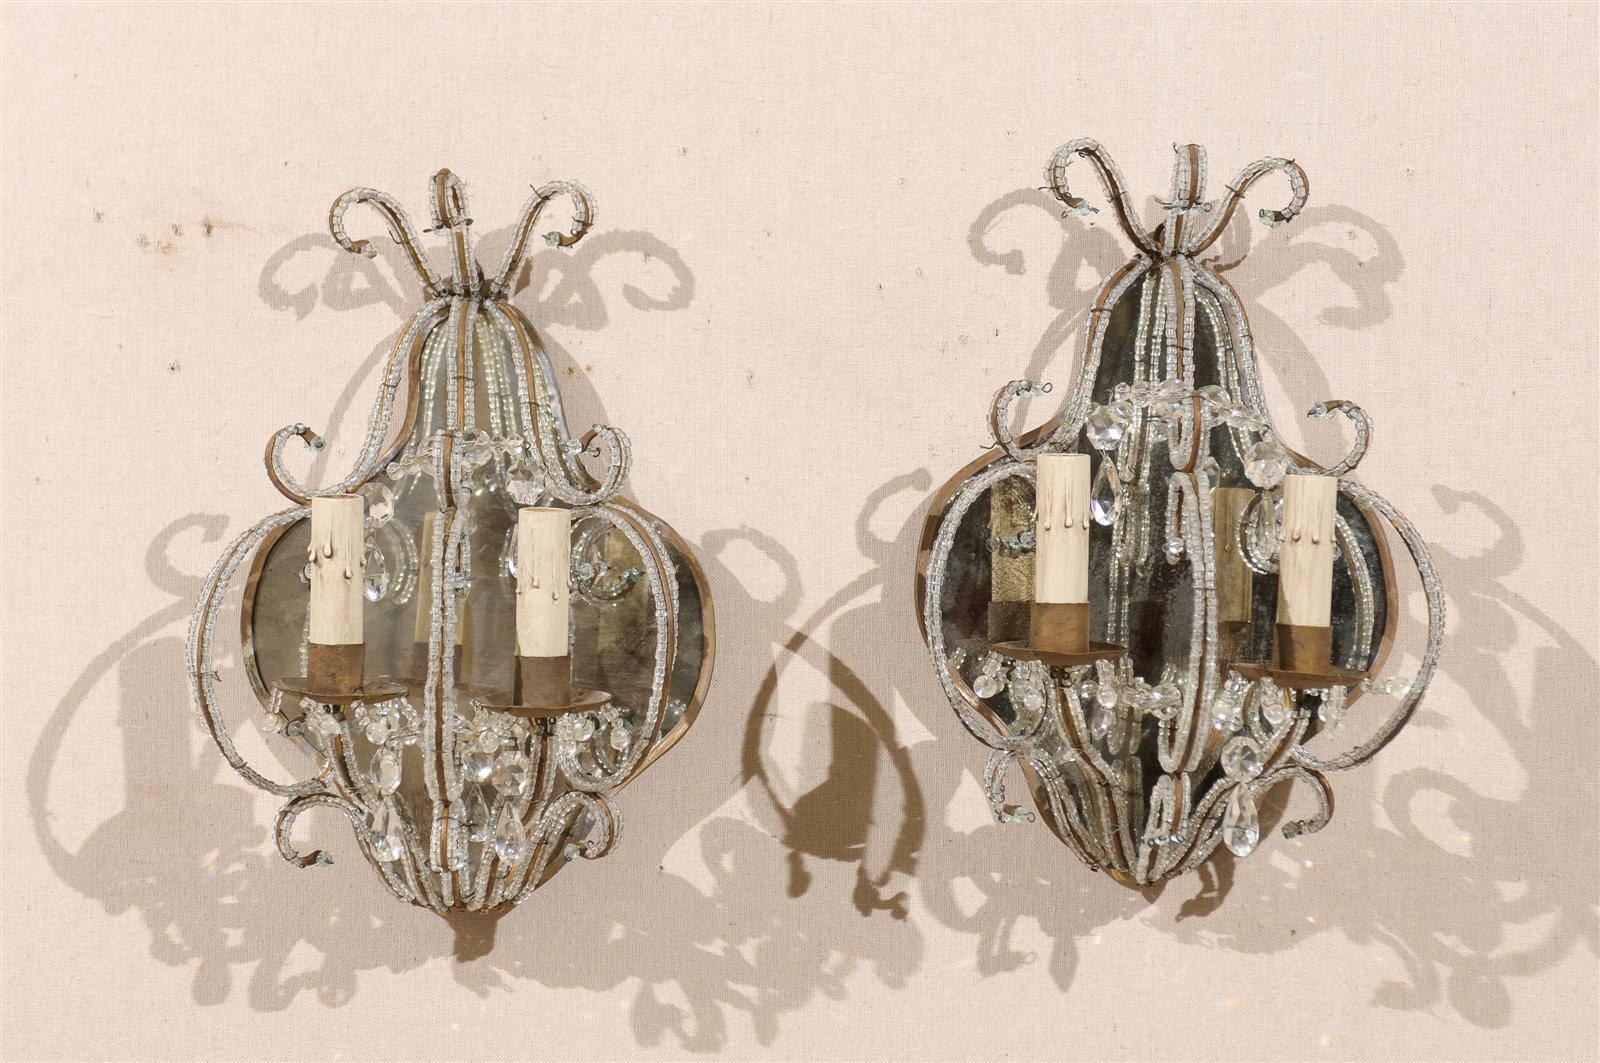 A pair of Italian 20th century two-light mirror-back crystal sconces. This pair of Italian sconces features gilded armature and beaded decor. The flowing c-scrolls give this pair an elegant look. These sconces have been rewired for the United States.